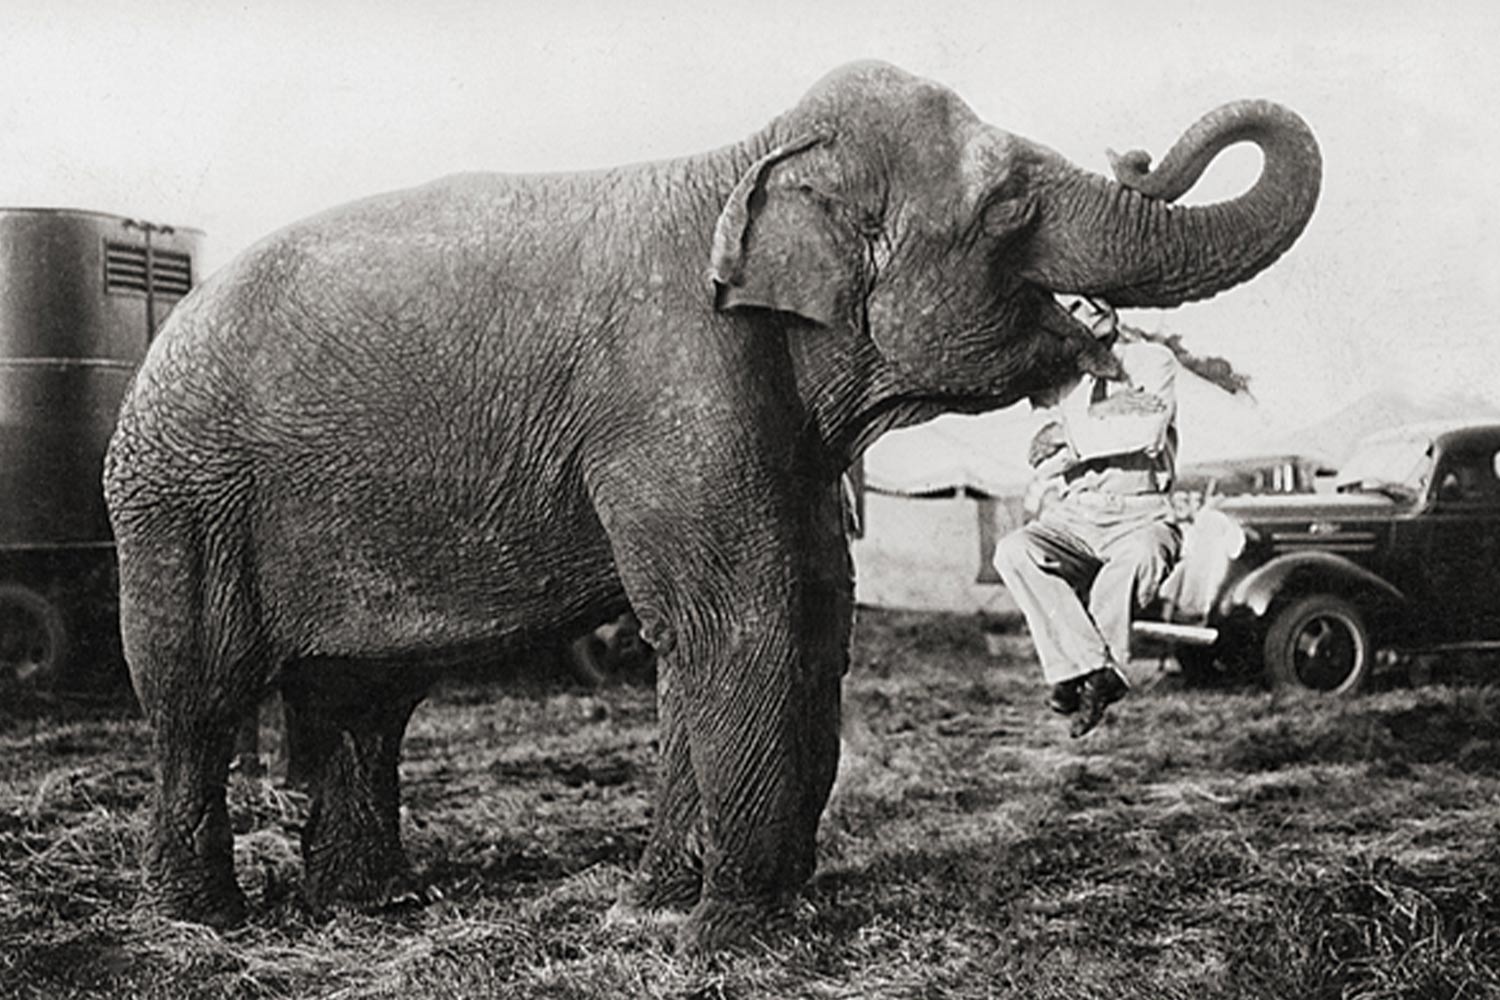 B&W photograph of circus elephant holding a man gently in his mouth by his head